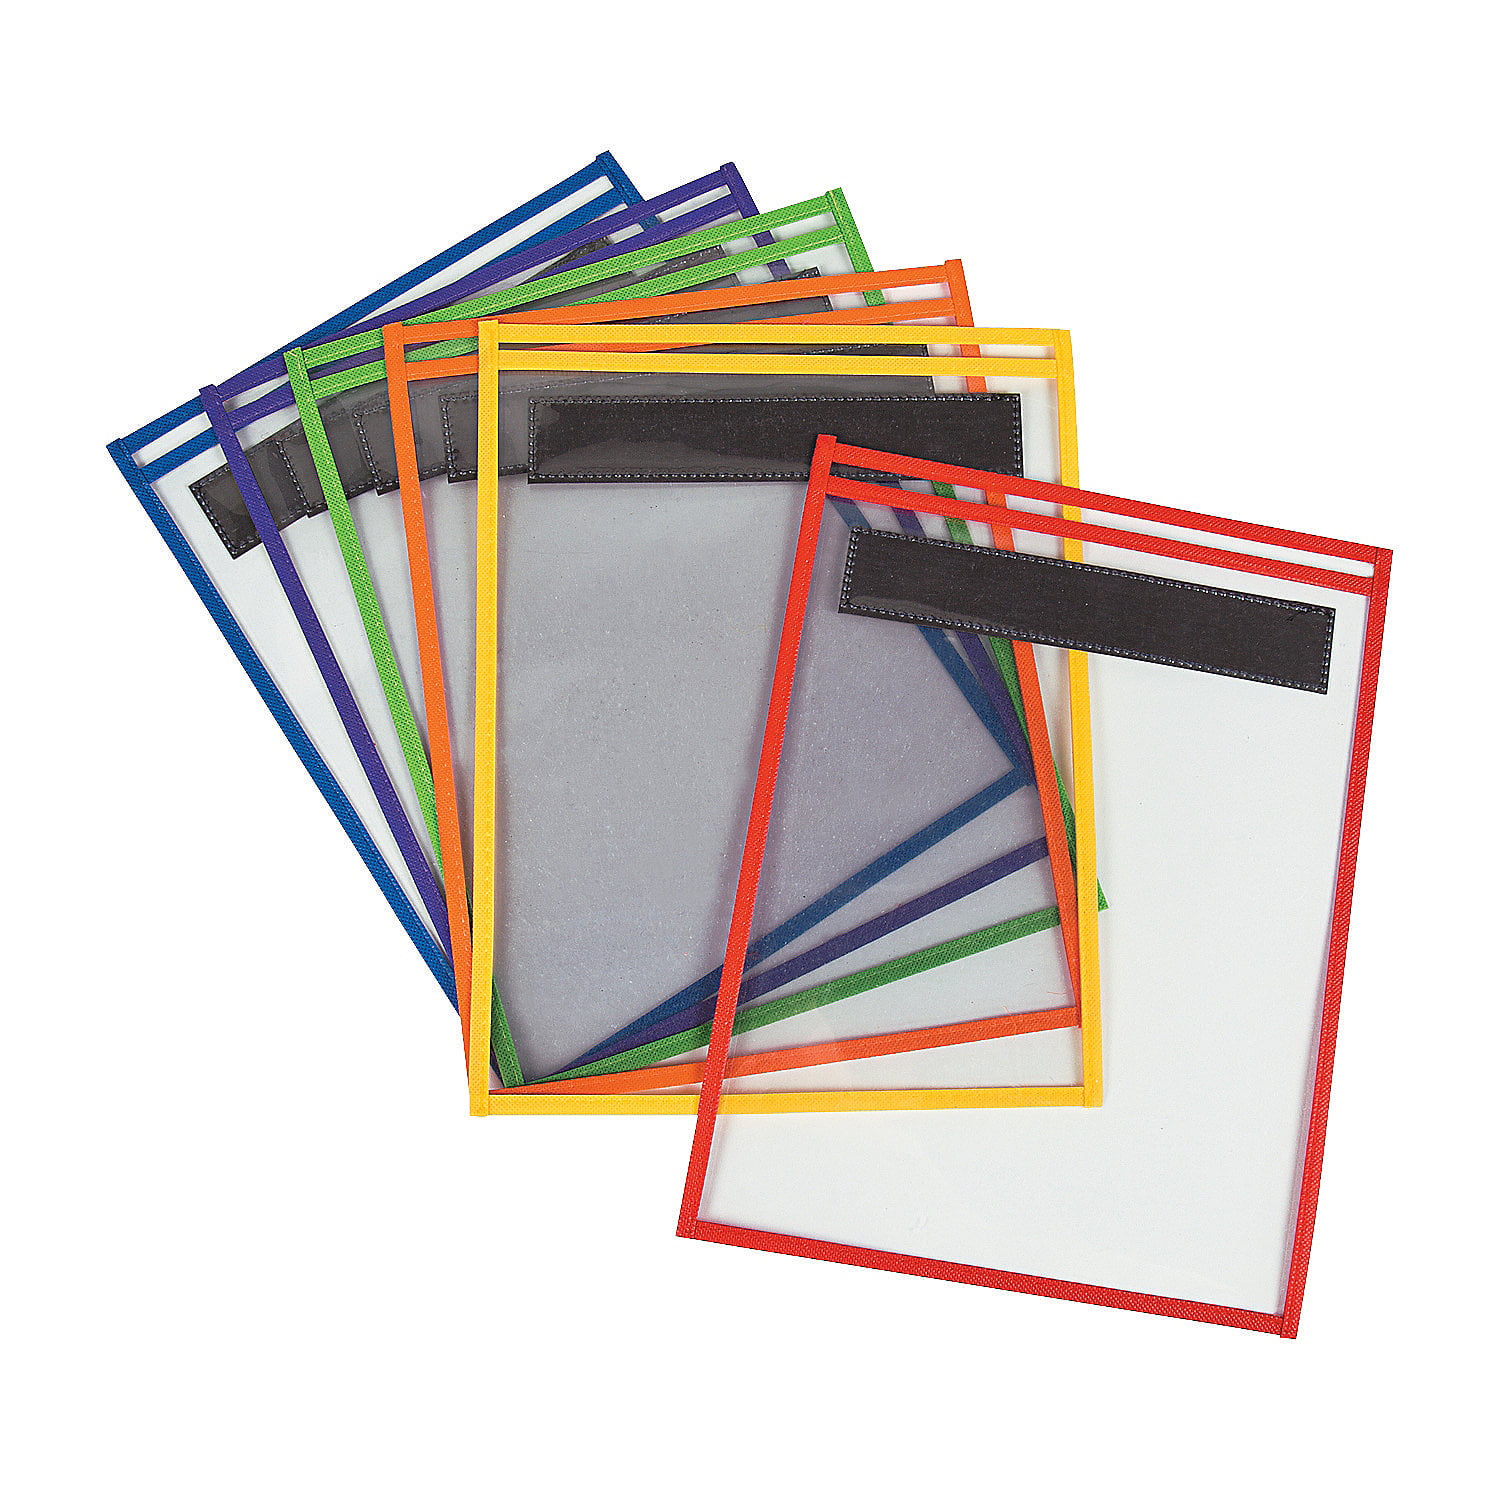 Magnetic Dry Erase Sleeves - Educational - 6 Pieces - Walmart.com ...